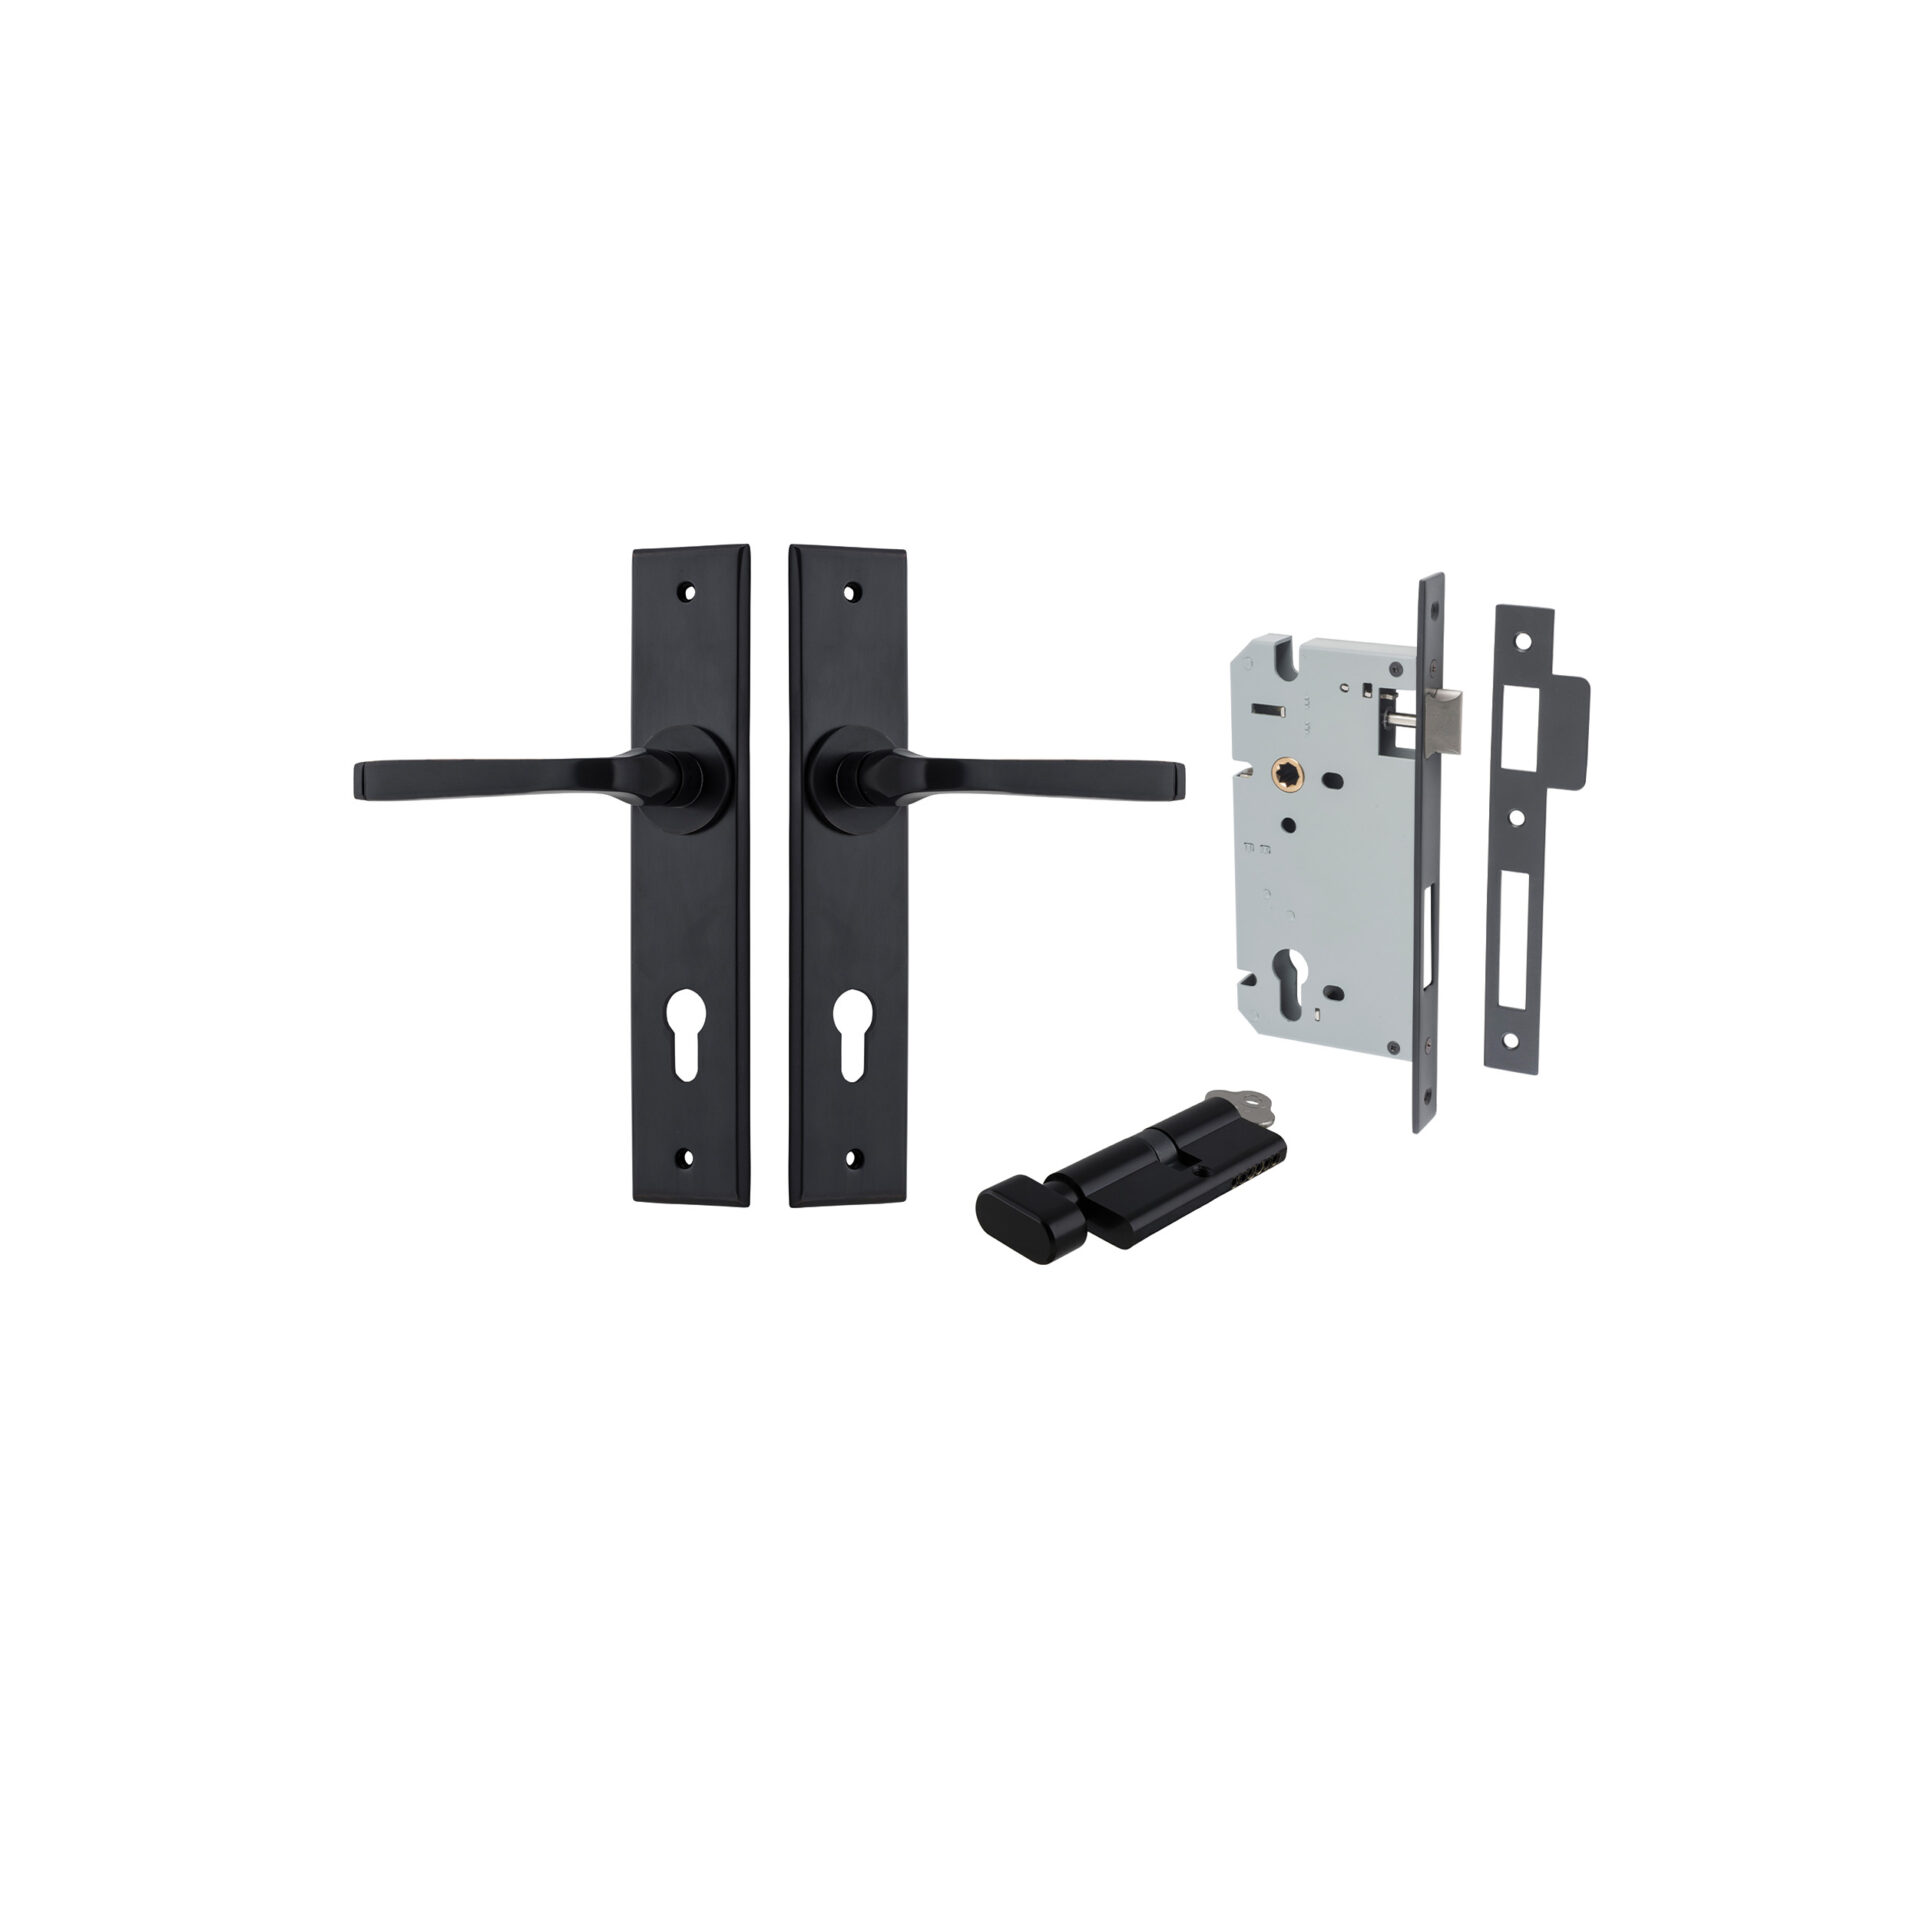 12788KENTR60KT - Annecy Lever - Chamfered Backplate Entrance Kit with High Security Lock - Matt Black - Entrance